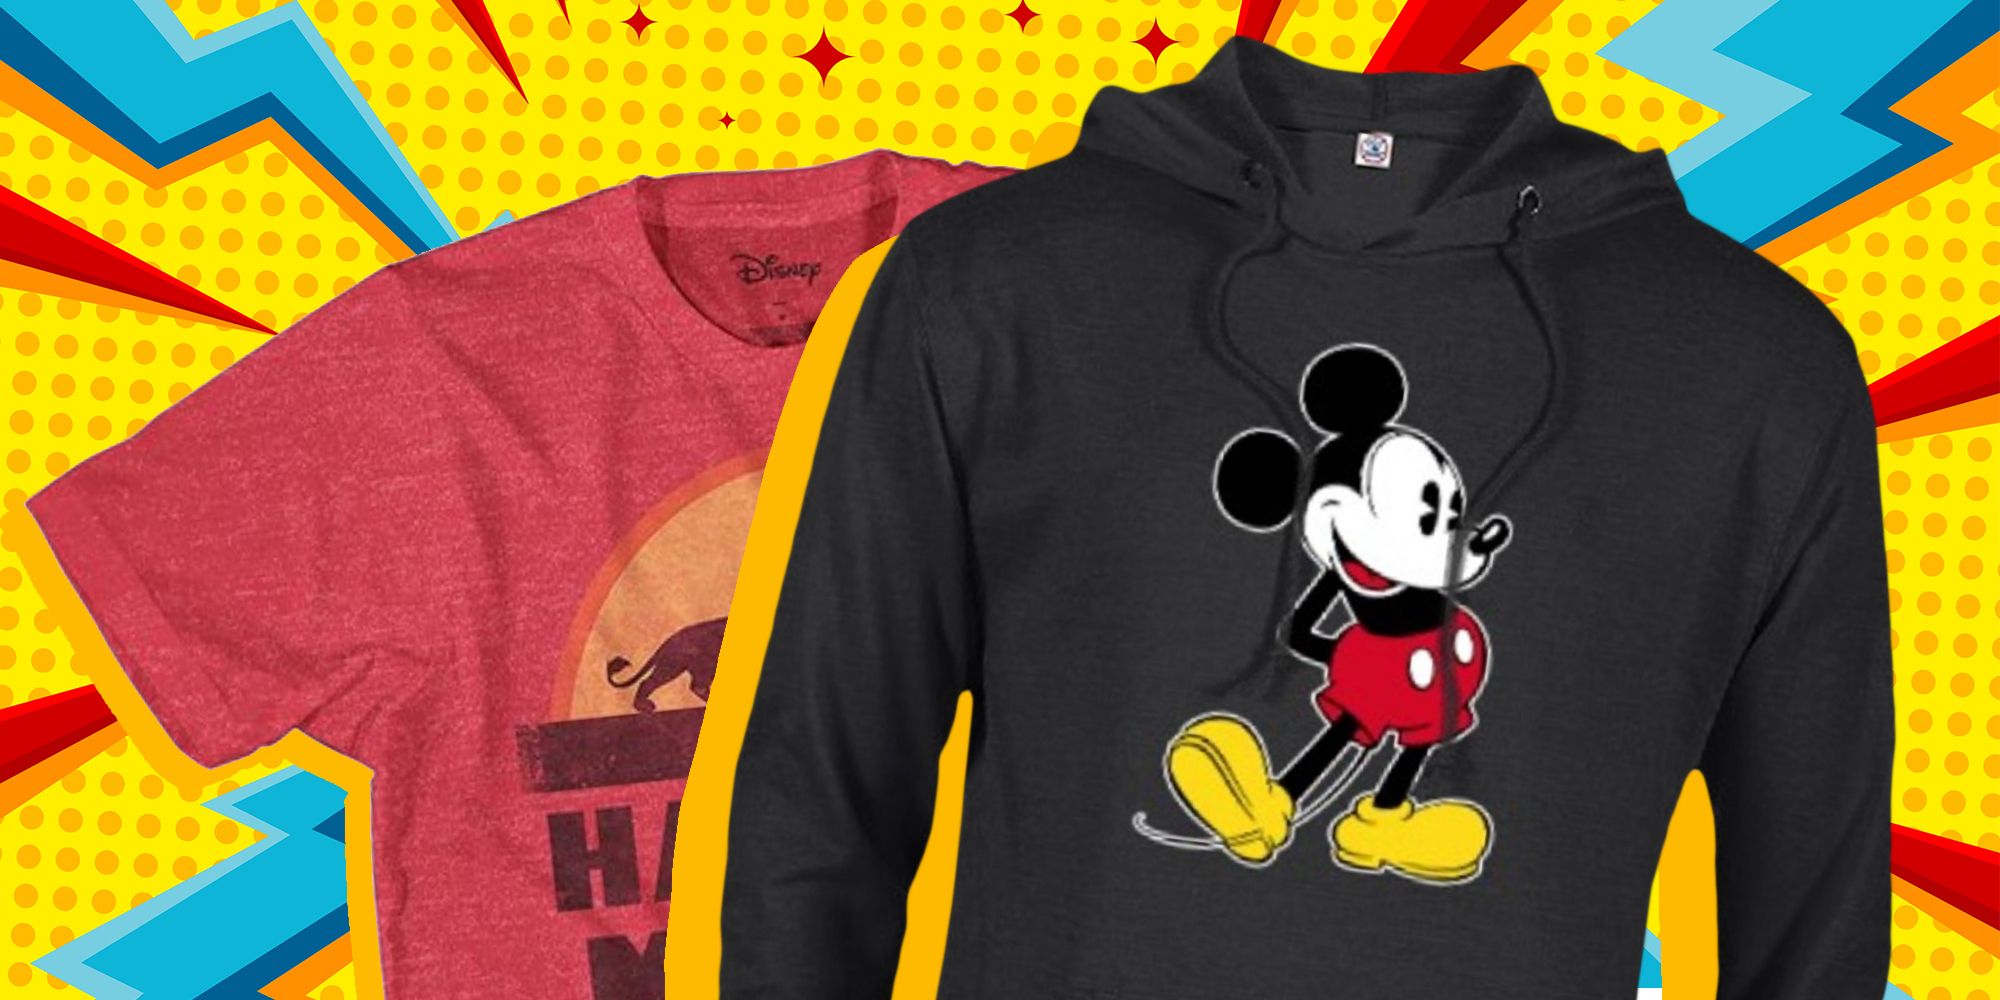 Disney Mickey Mouse pullover sweatshirt - clothing & accessories